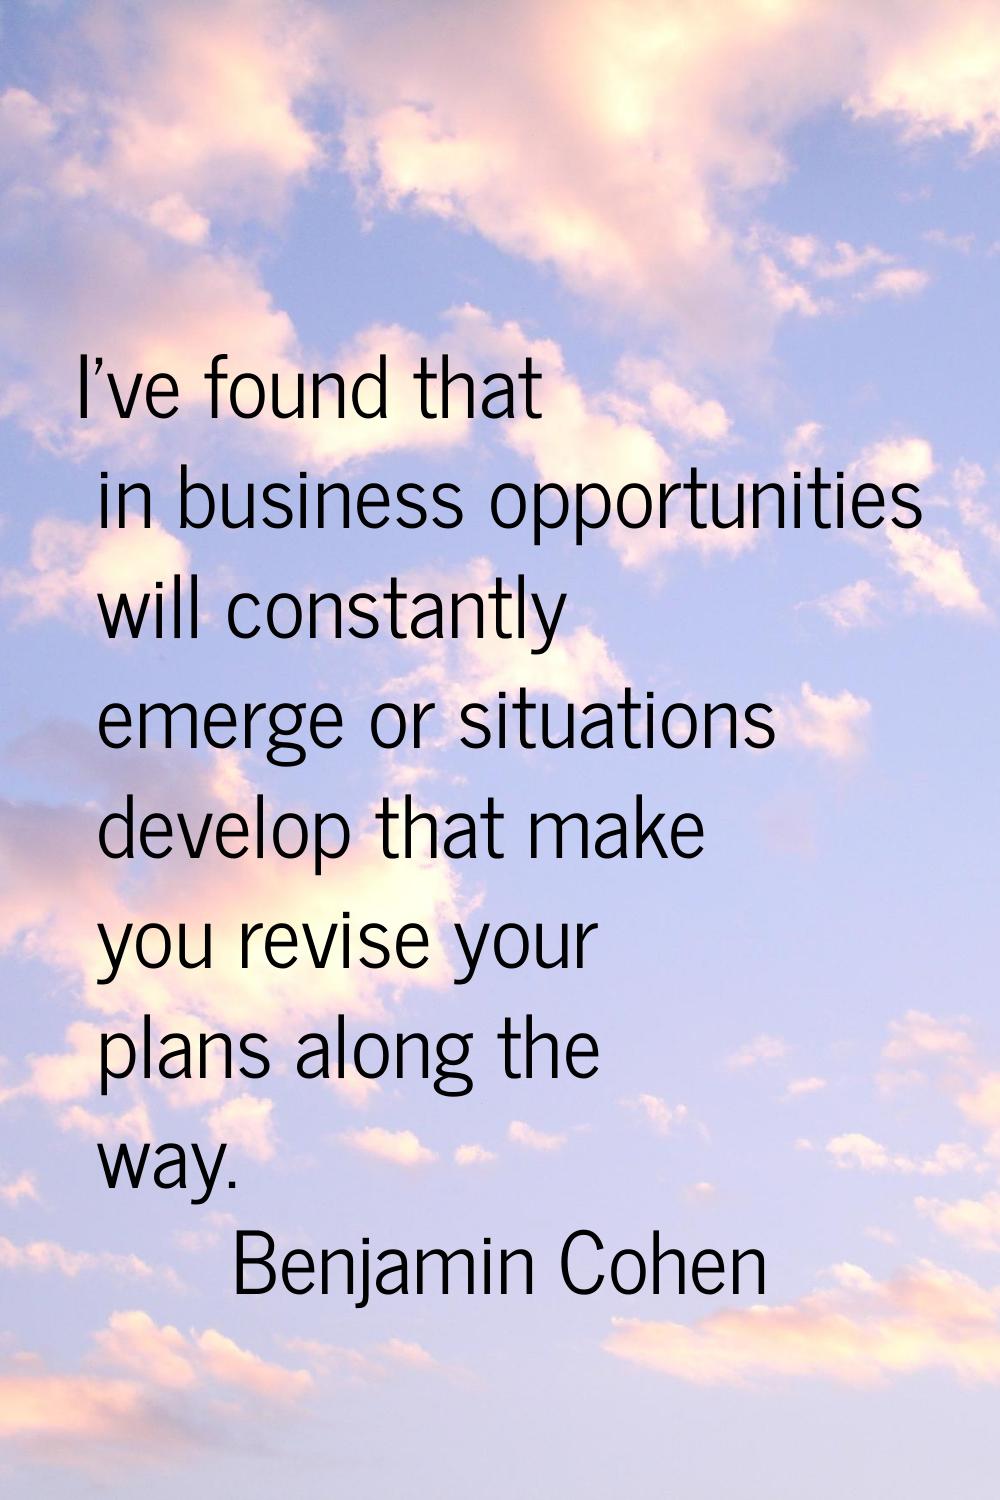 I've found that in business opportunities will constantly emerge or situations develop that make yo